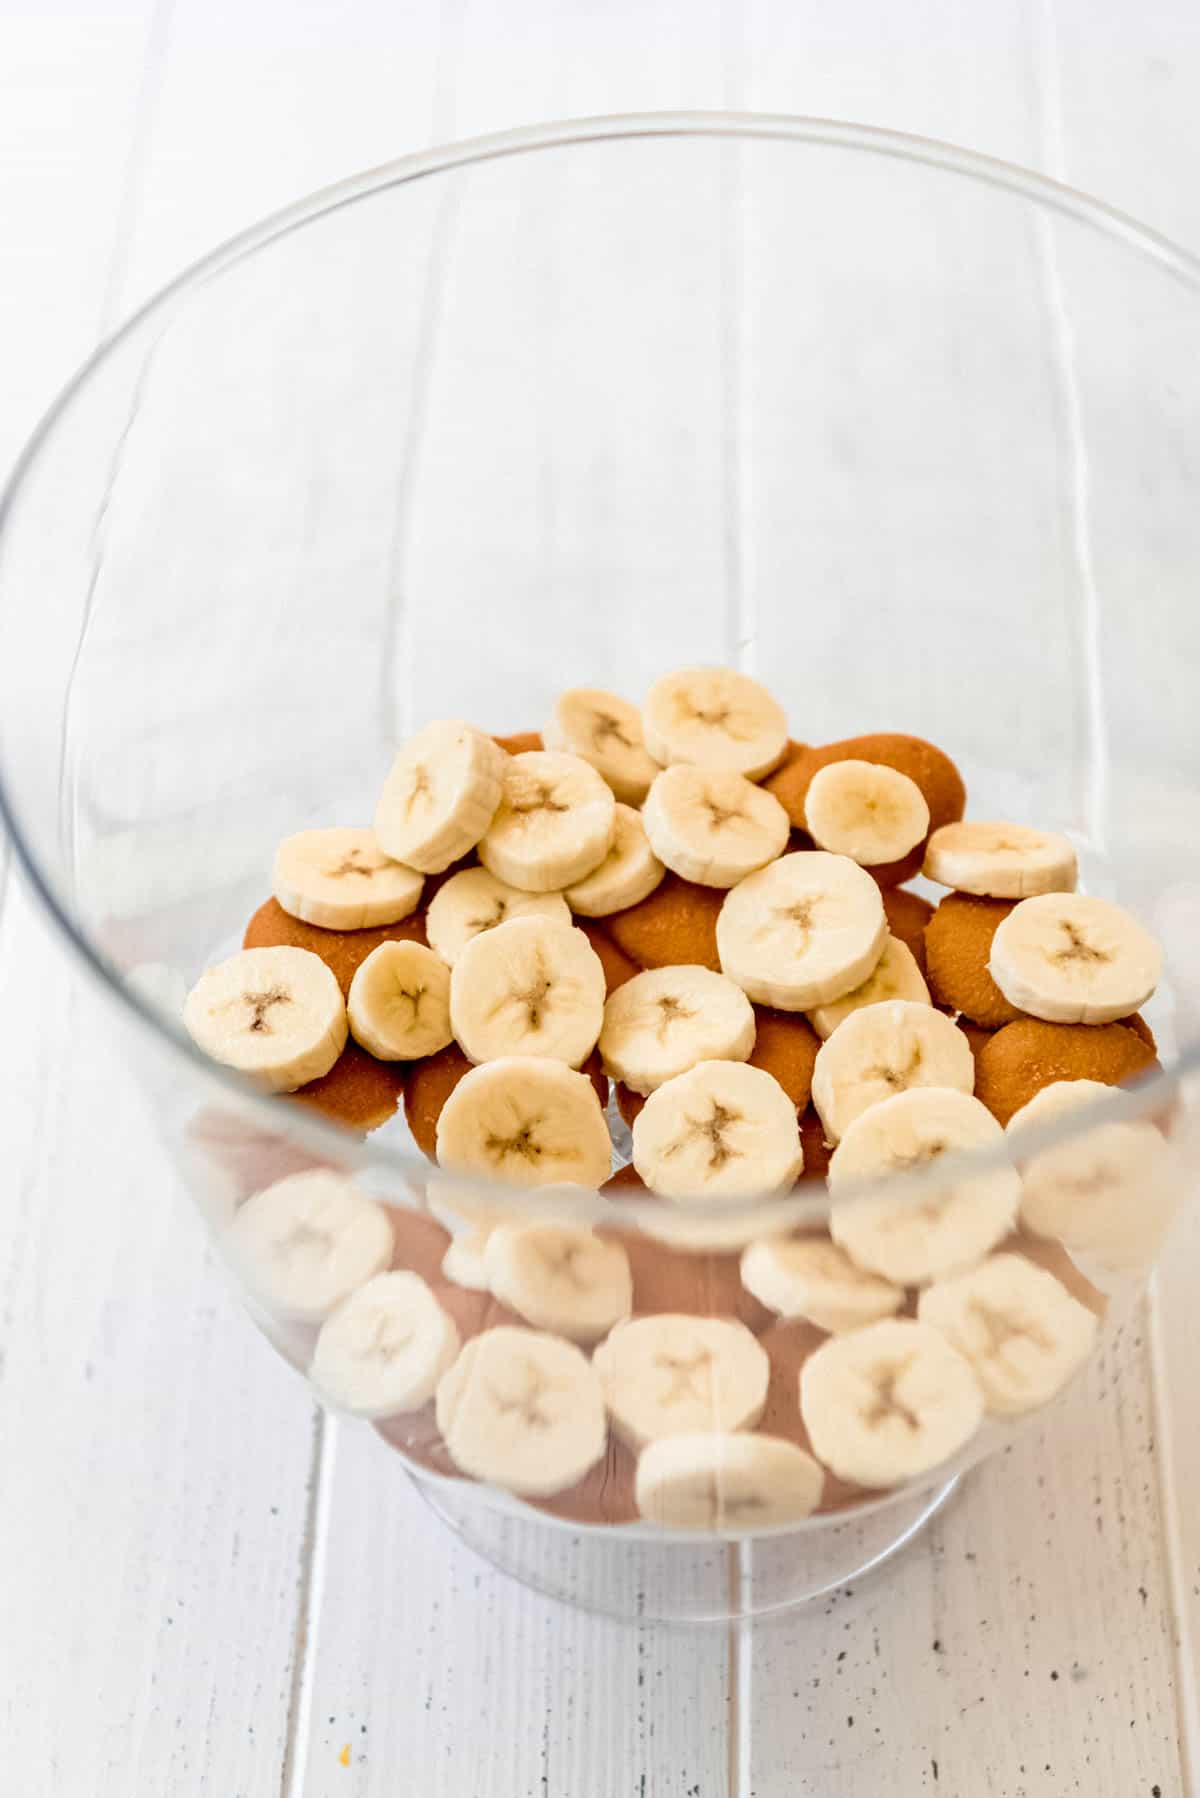 Layering sliced bananas on top of Nilla wafers in a trifle dish.